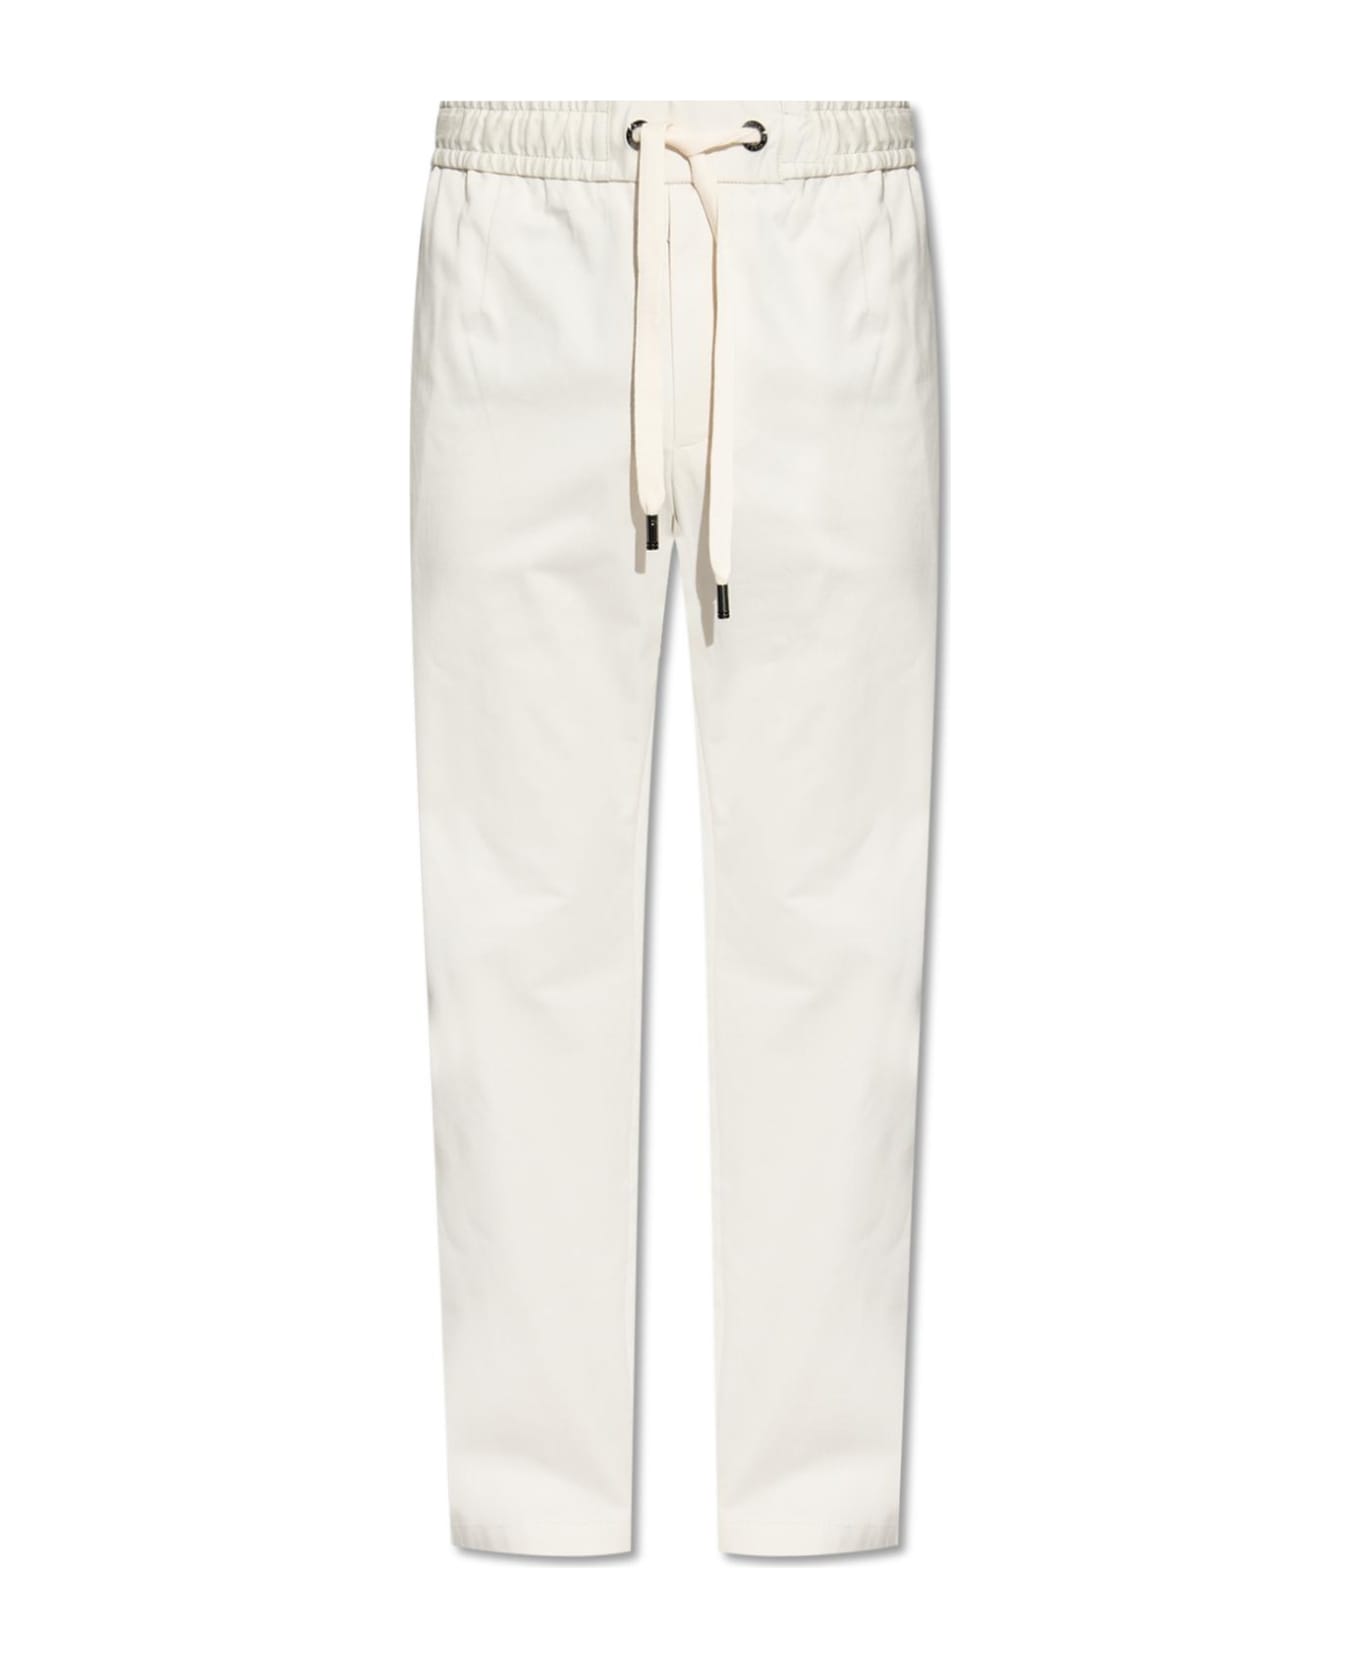 Dolce amore & Gabbana Cotton Trousers - Beige